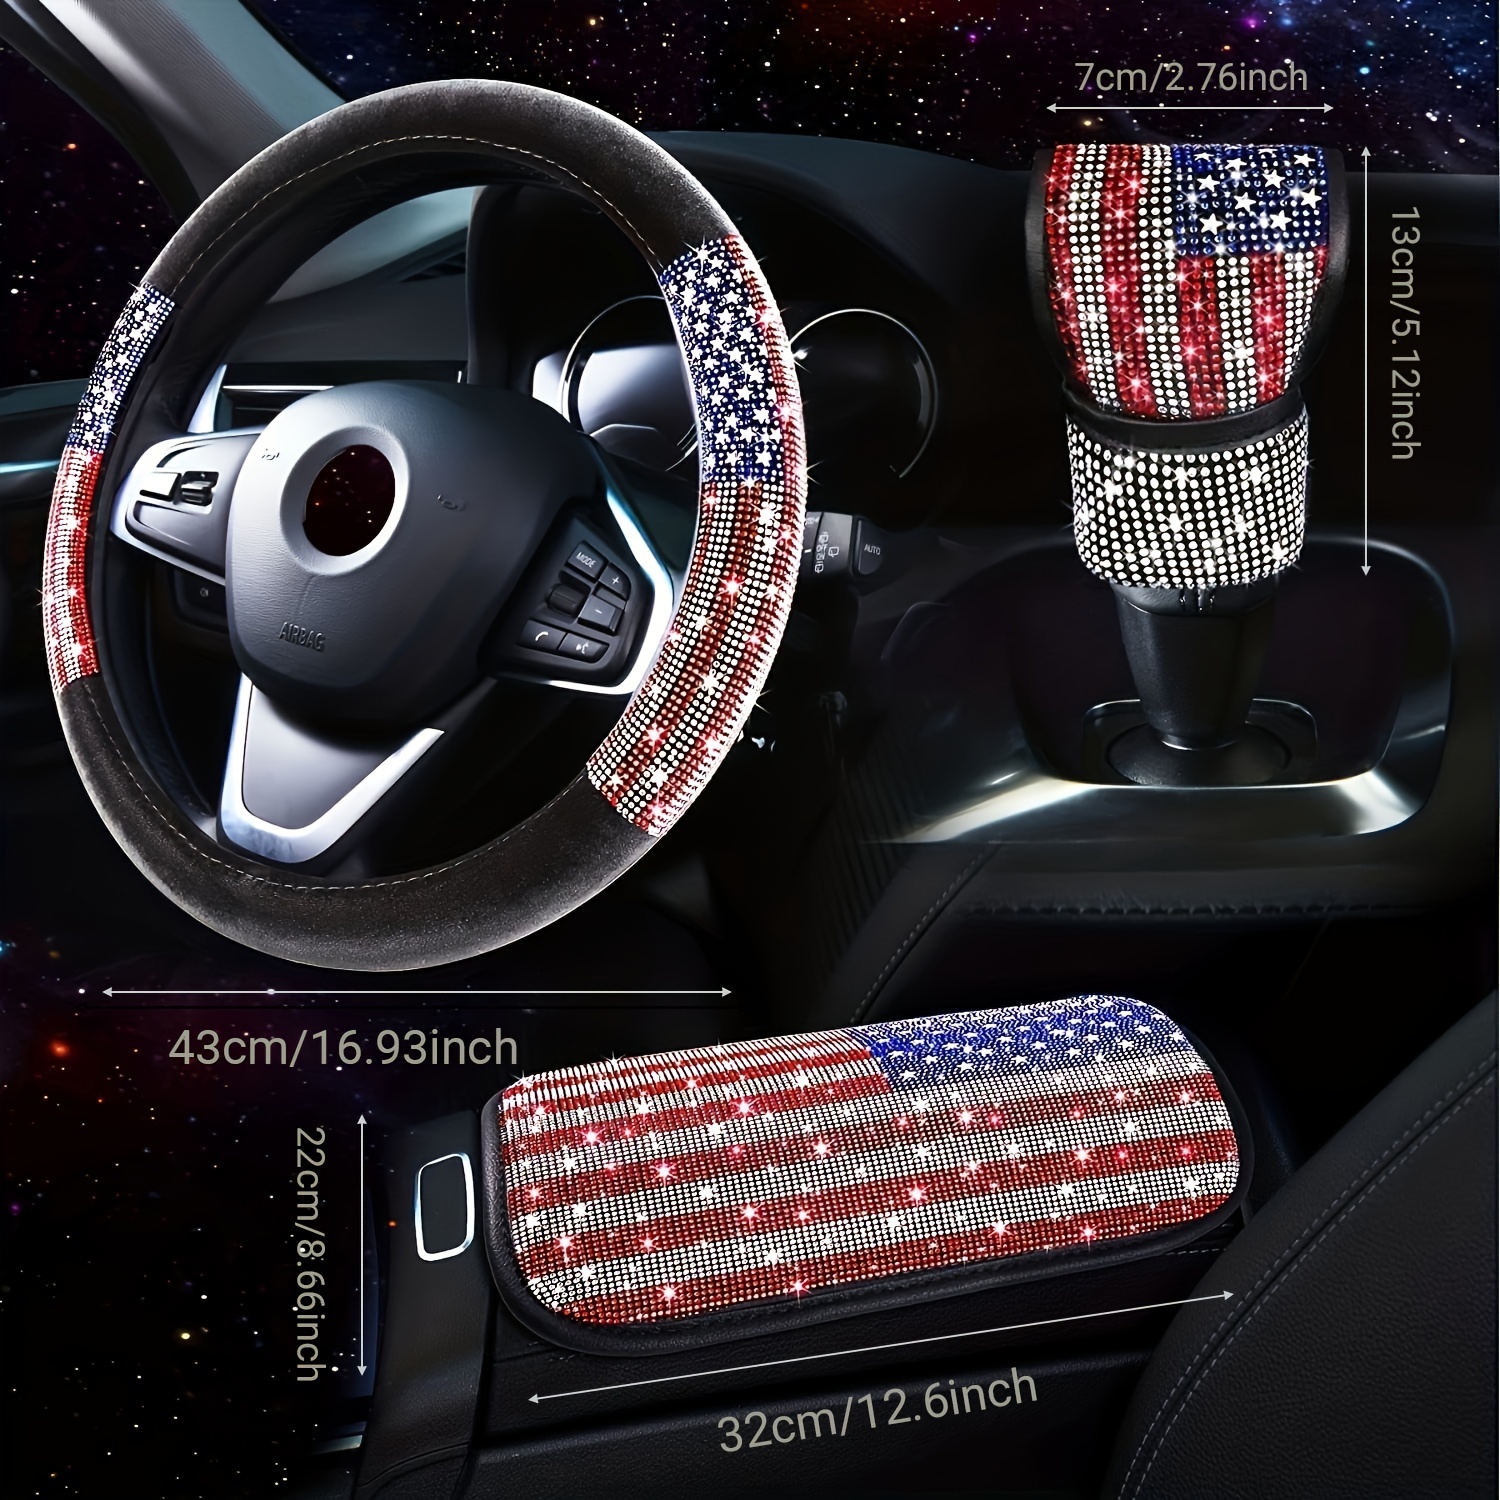 Rhinestone Bling Car Accessories 3pcs Women American Flag Bling Steering  Wheel Cover Glitter Center Console Cover Sparkly Gear Shift Cover, High-quality & Affordable